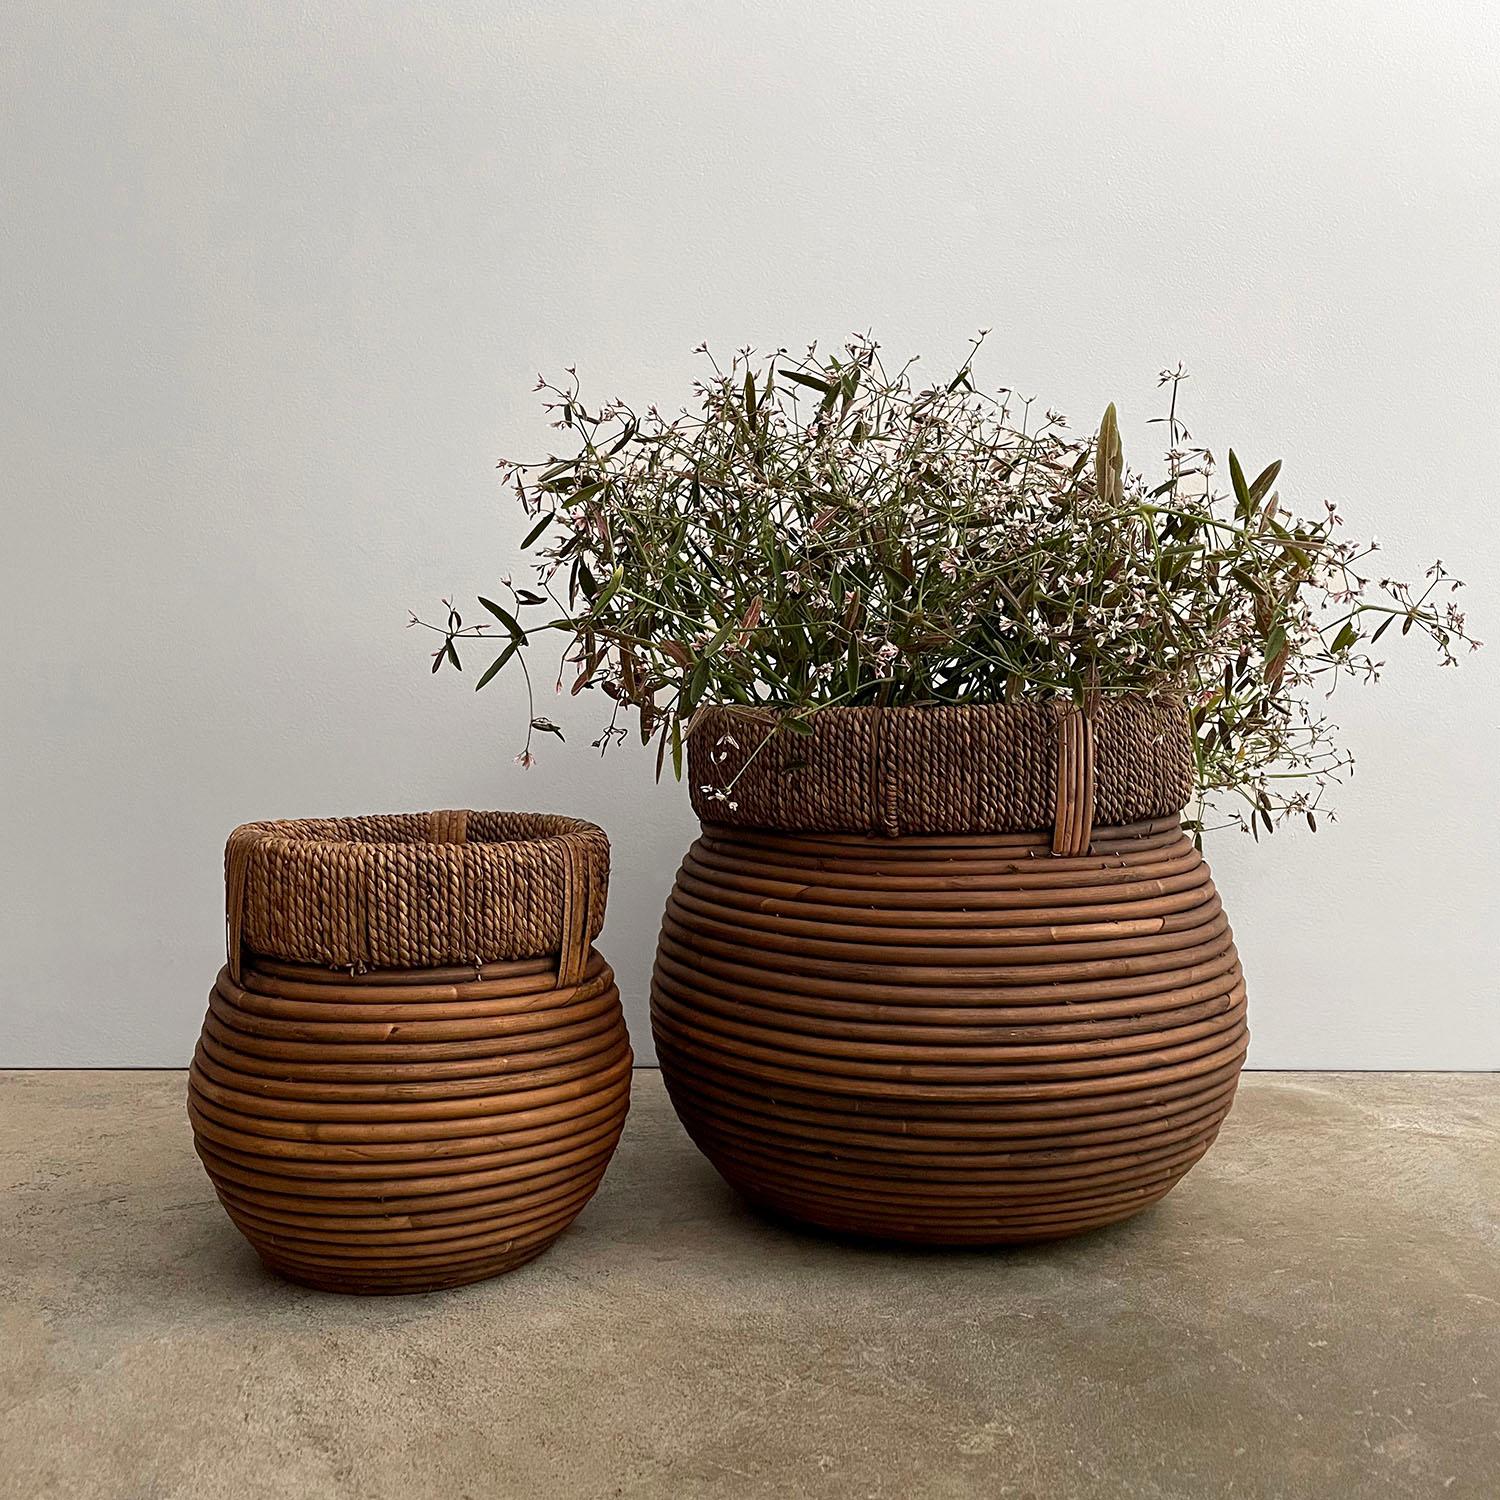 Italian coiled rattan bins
Woven rush seagrass banding 
Natural color variations throughout 
Patina from age and use 
Sold as a pair 

Small: 7.75” H x 8” Diam
Large: 10.25” H x 12” Diam
